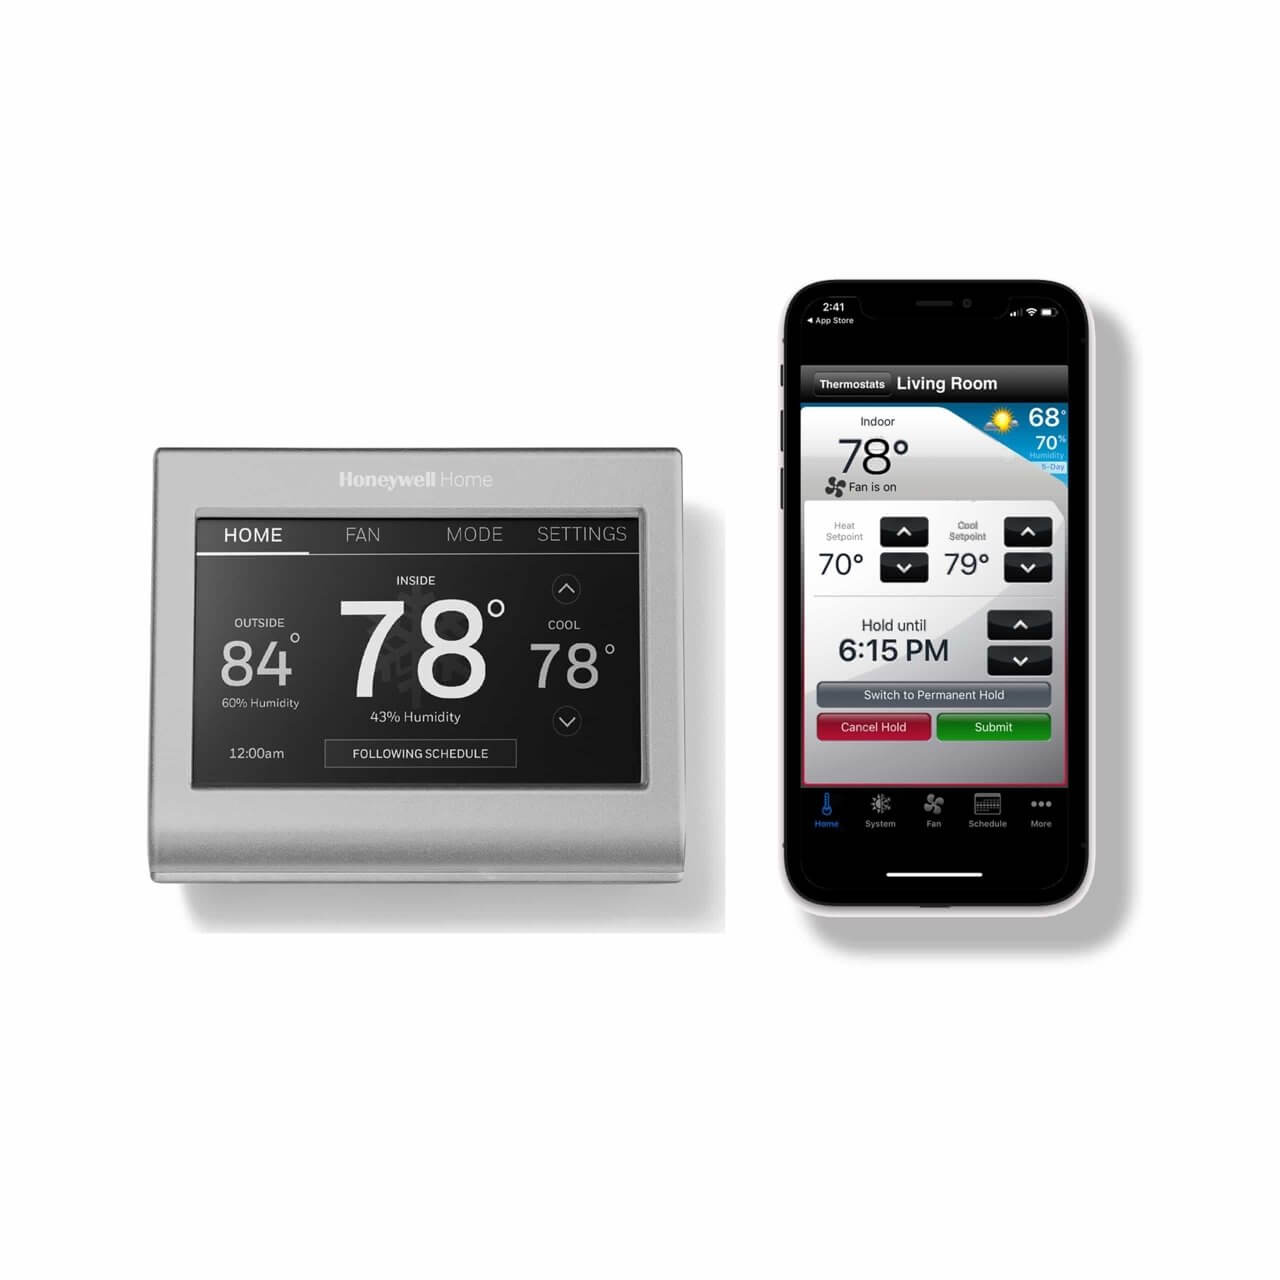 WiFi Color Touchscreen Thermostat a modern thermostat with WiFi connectivity for convenient temperature control.